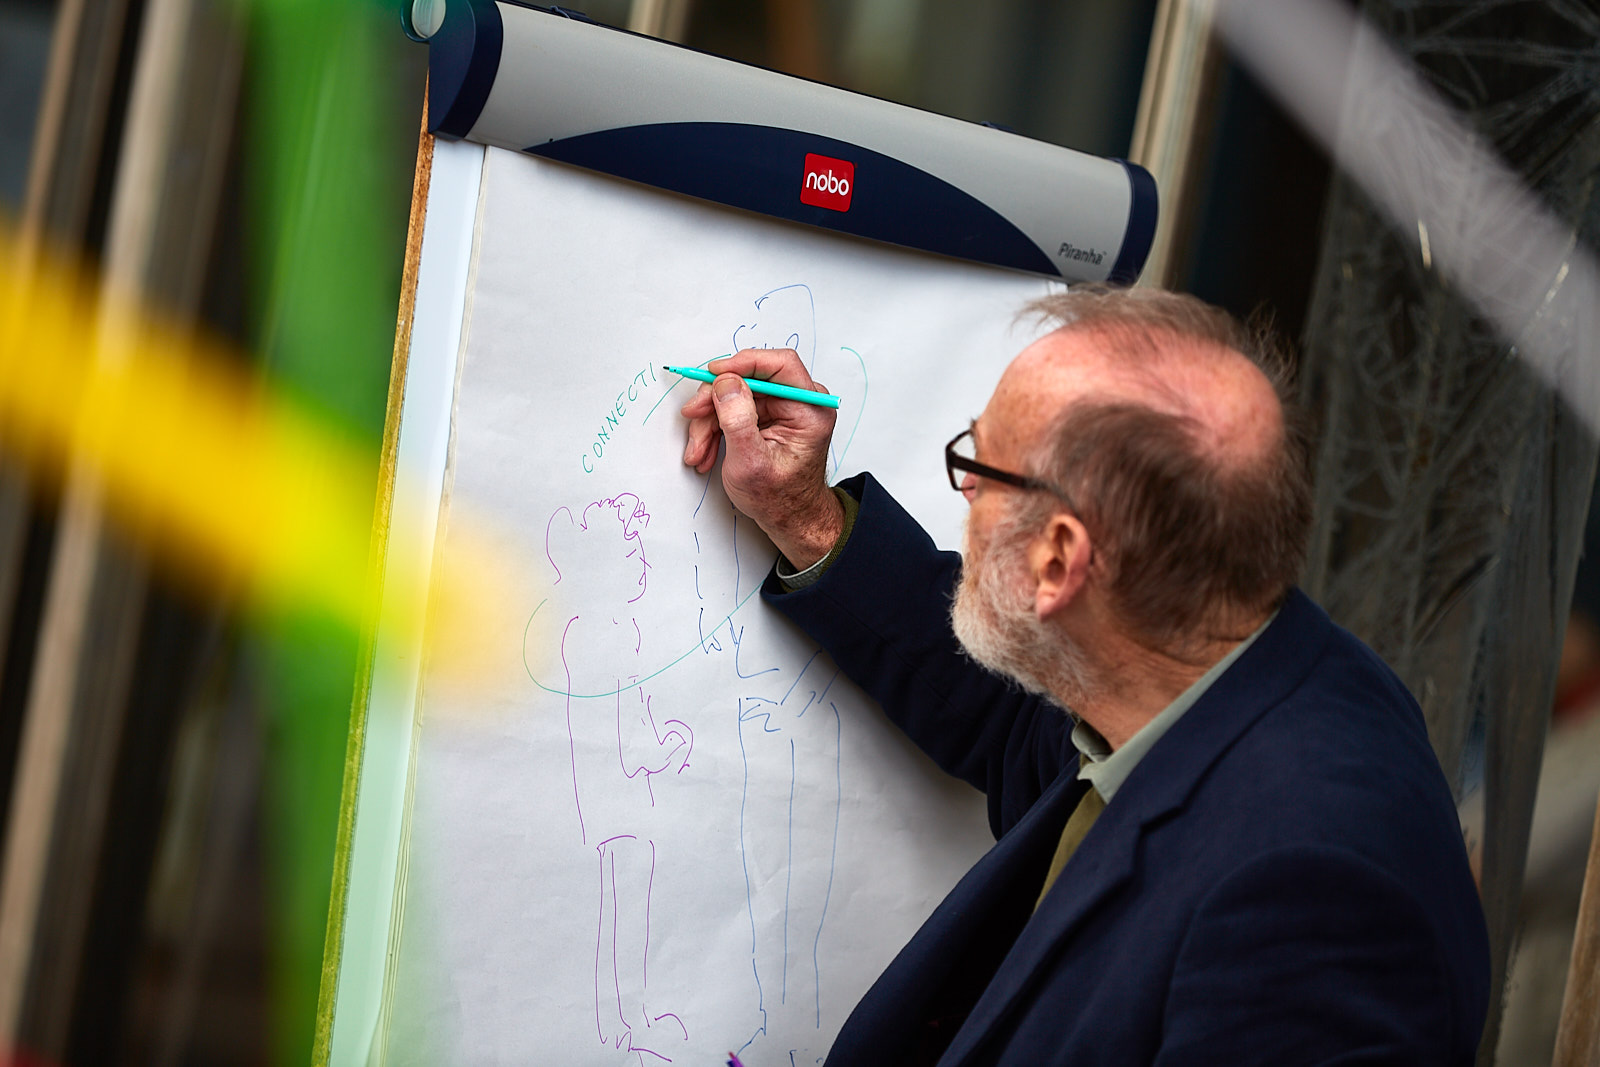 Visual artist Tom Jones makes a line drawing on a flip chart. He is capturing stories of bridge-building. The photo was taken at the Festival of Imagineers in 2018.